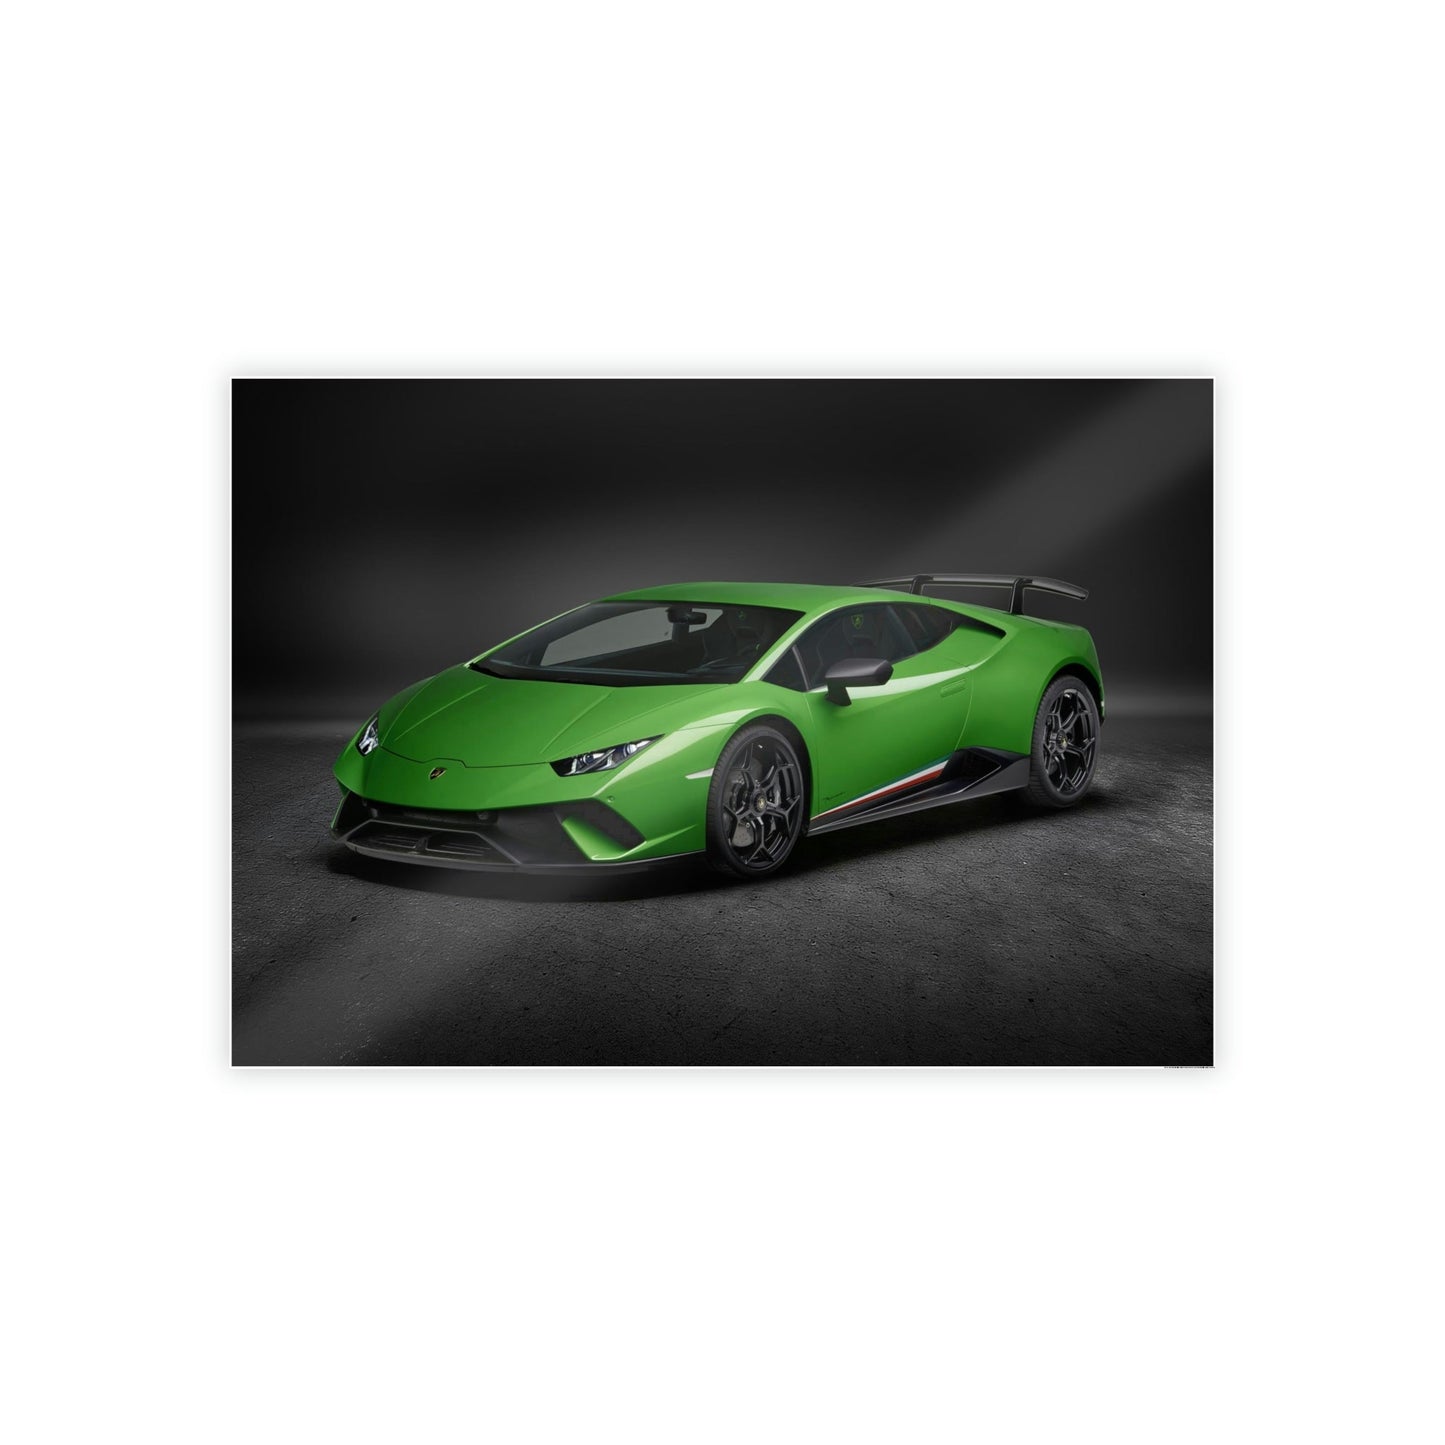 Redefining Speed: Lamborghini Canvas & Poster Print and Wall Art